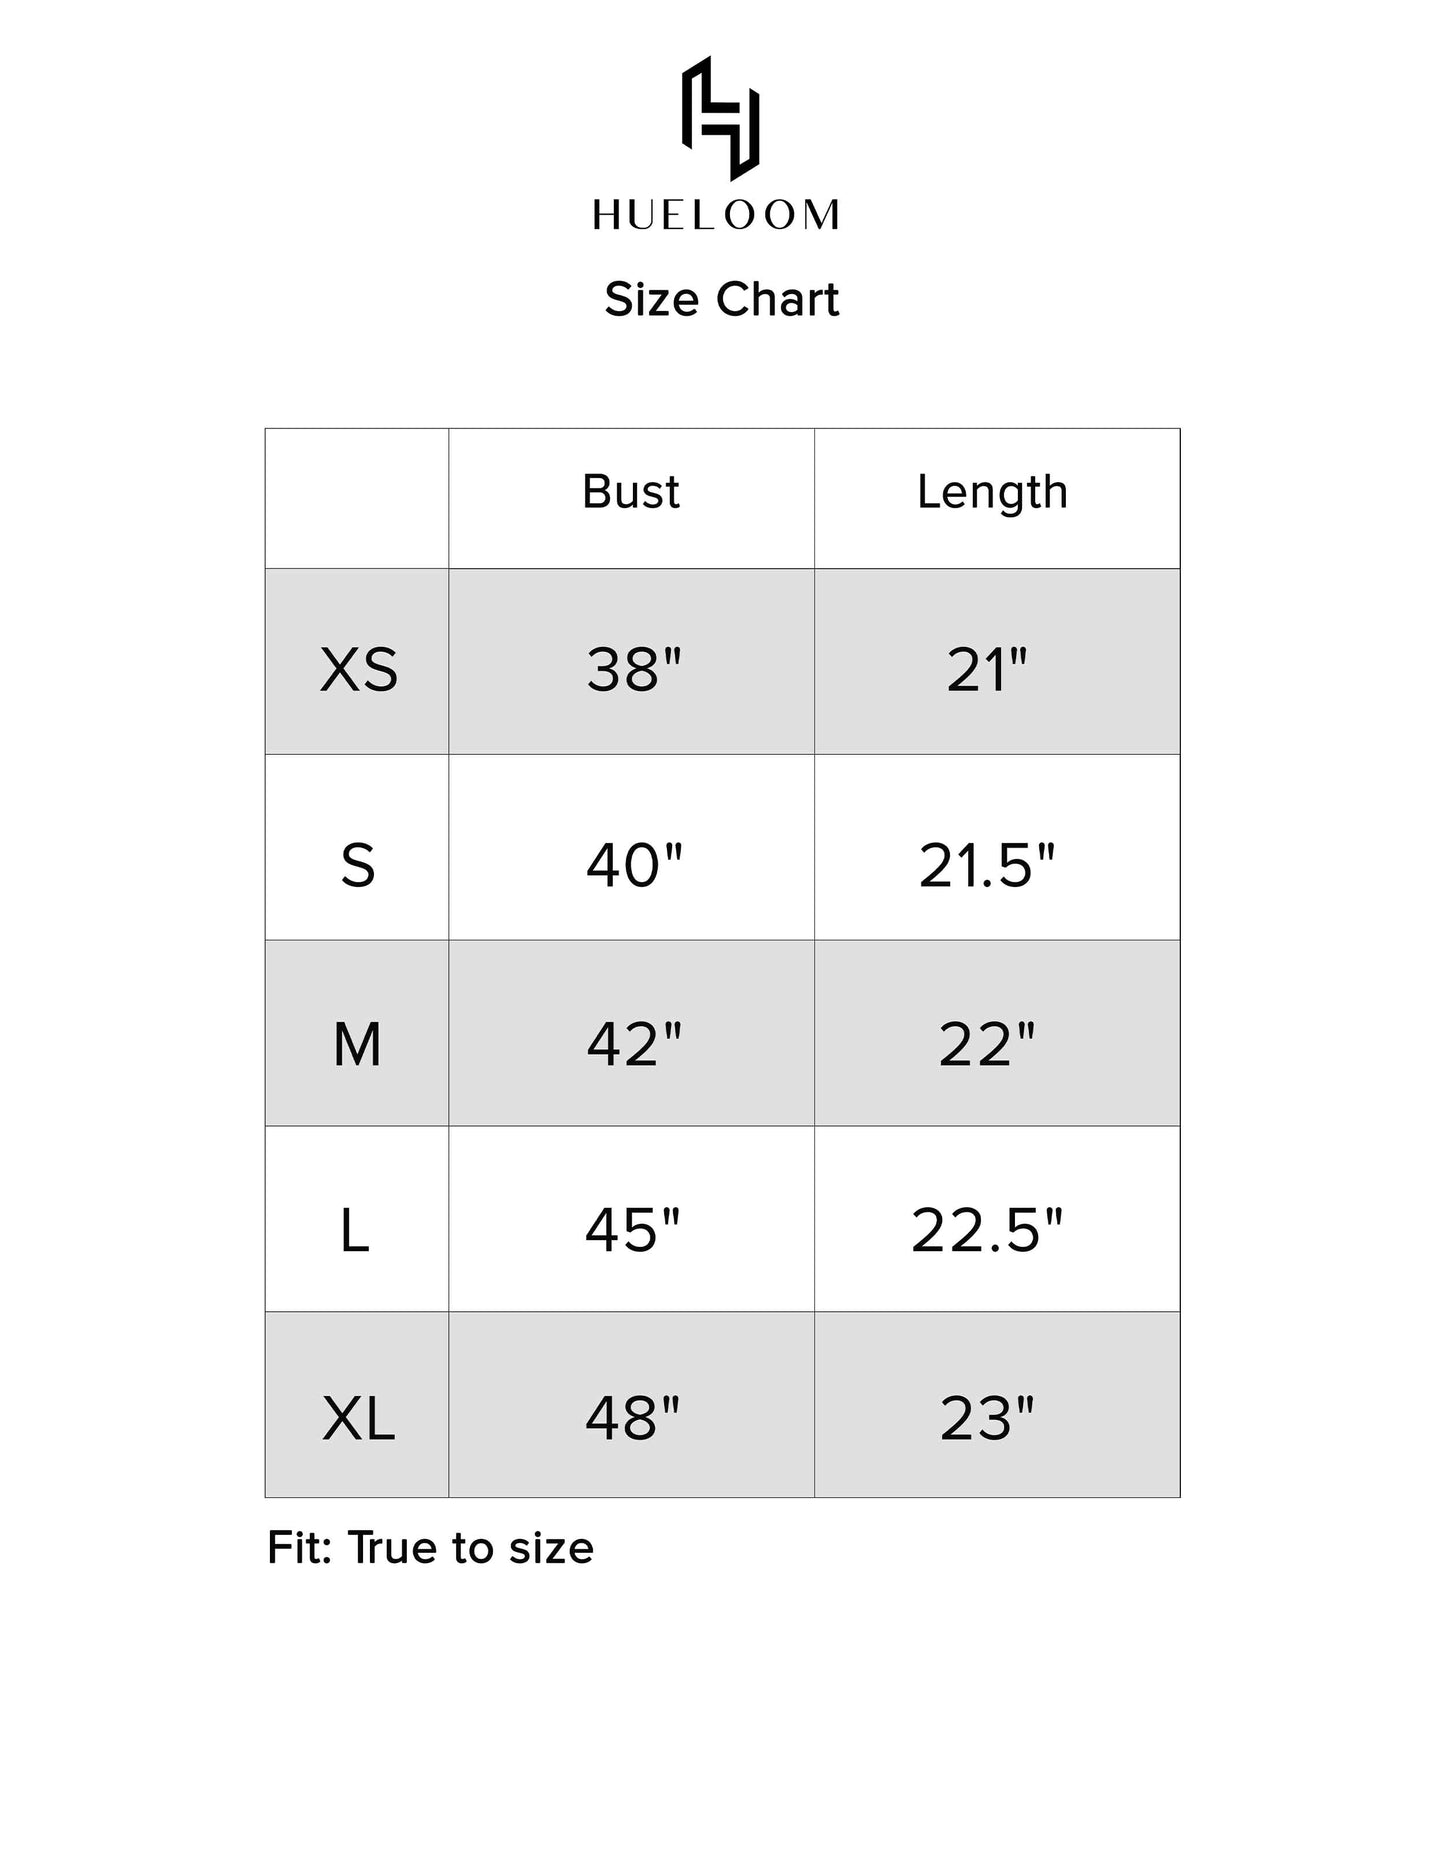 Hueloom's Reversible Shirt's size chart guide for sizes XS, S, M, L, XL